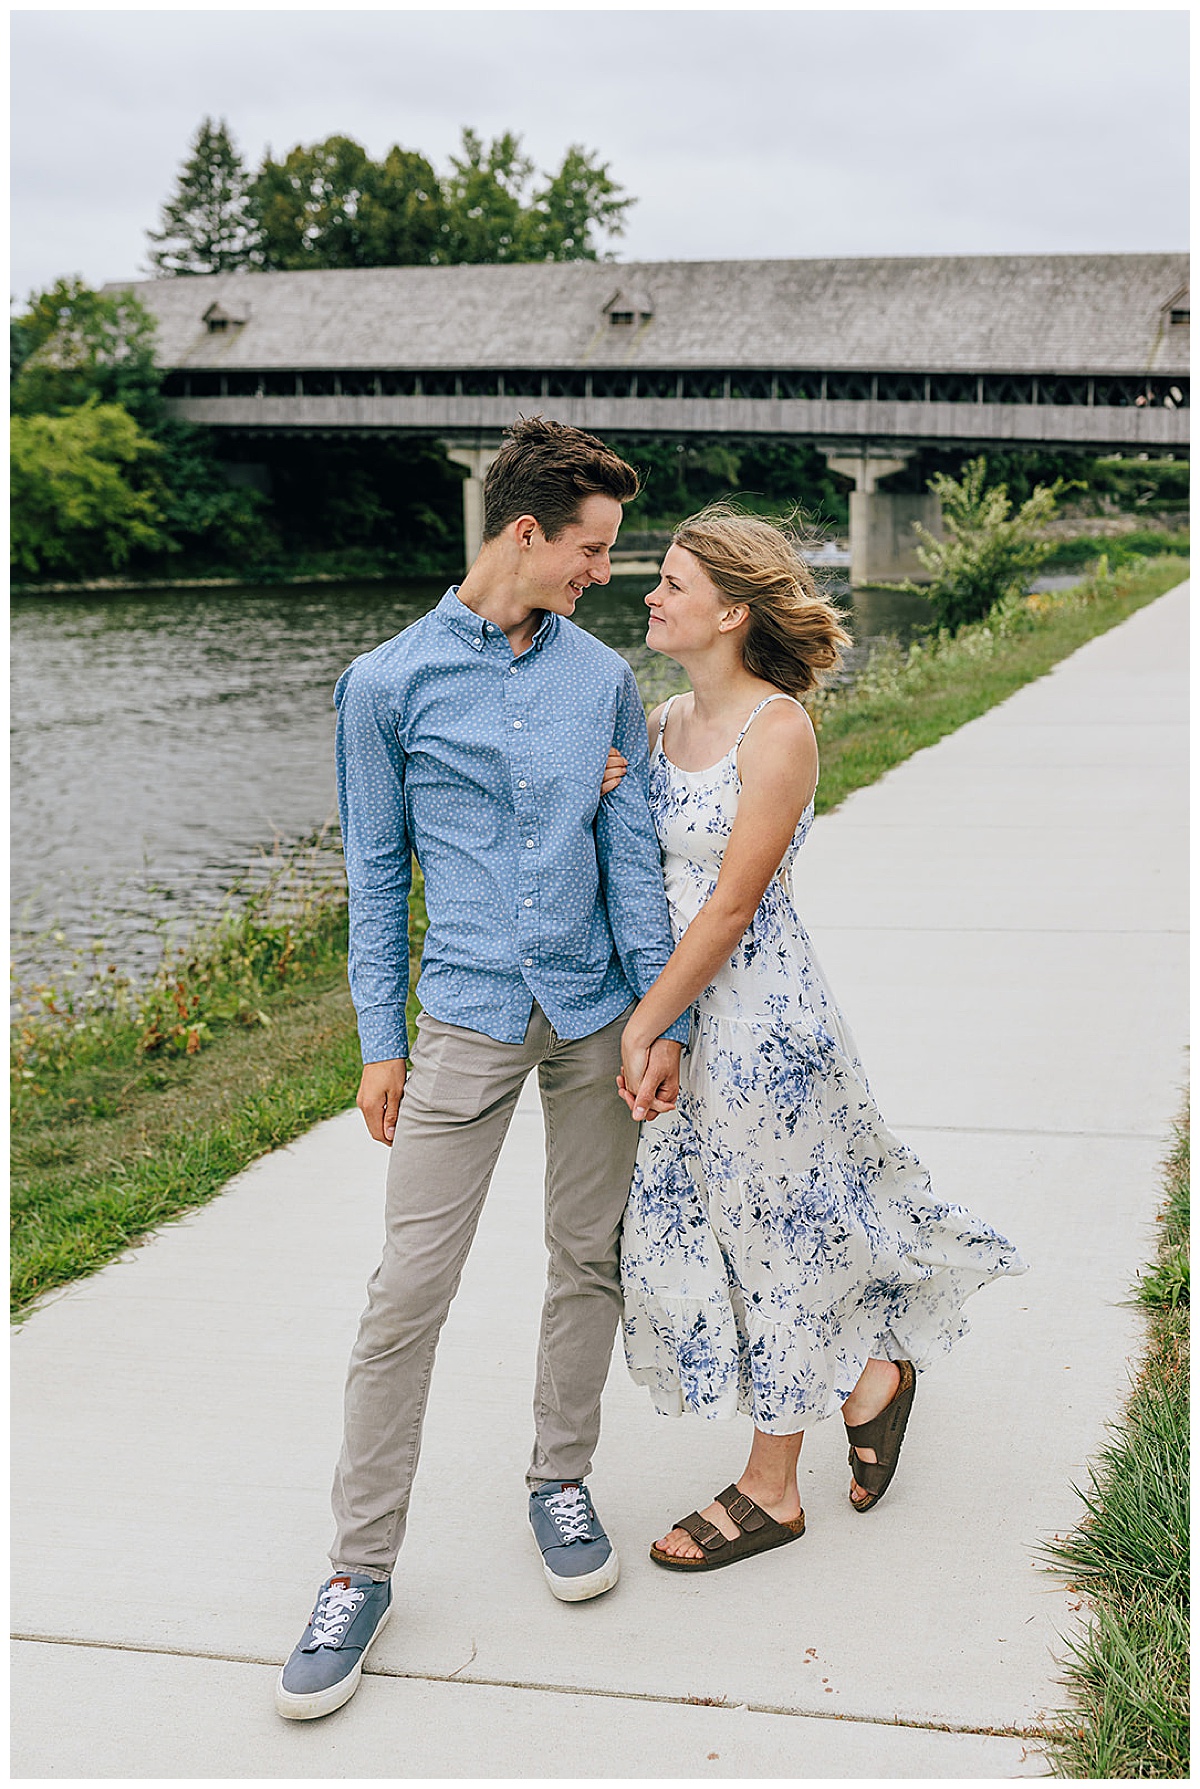 Engaged couple holding hands by water for Kayla Bouren Photography